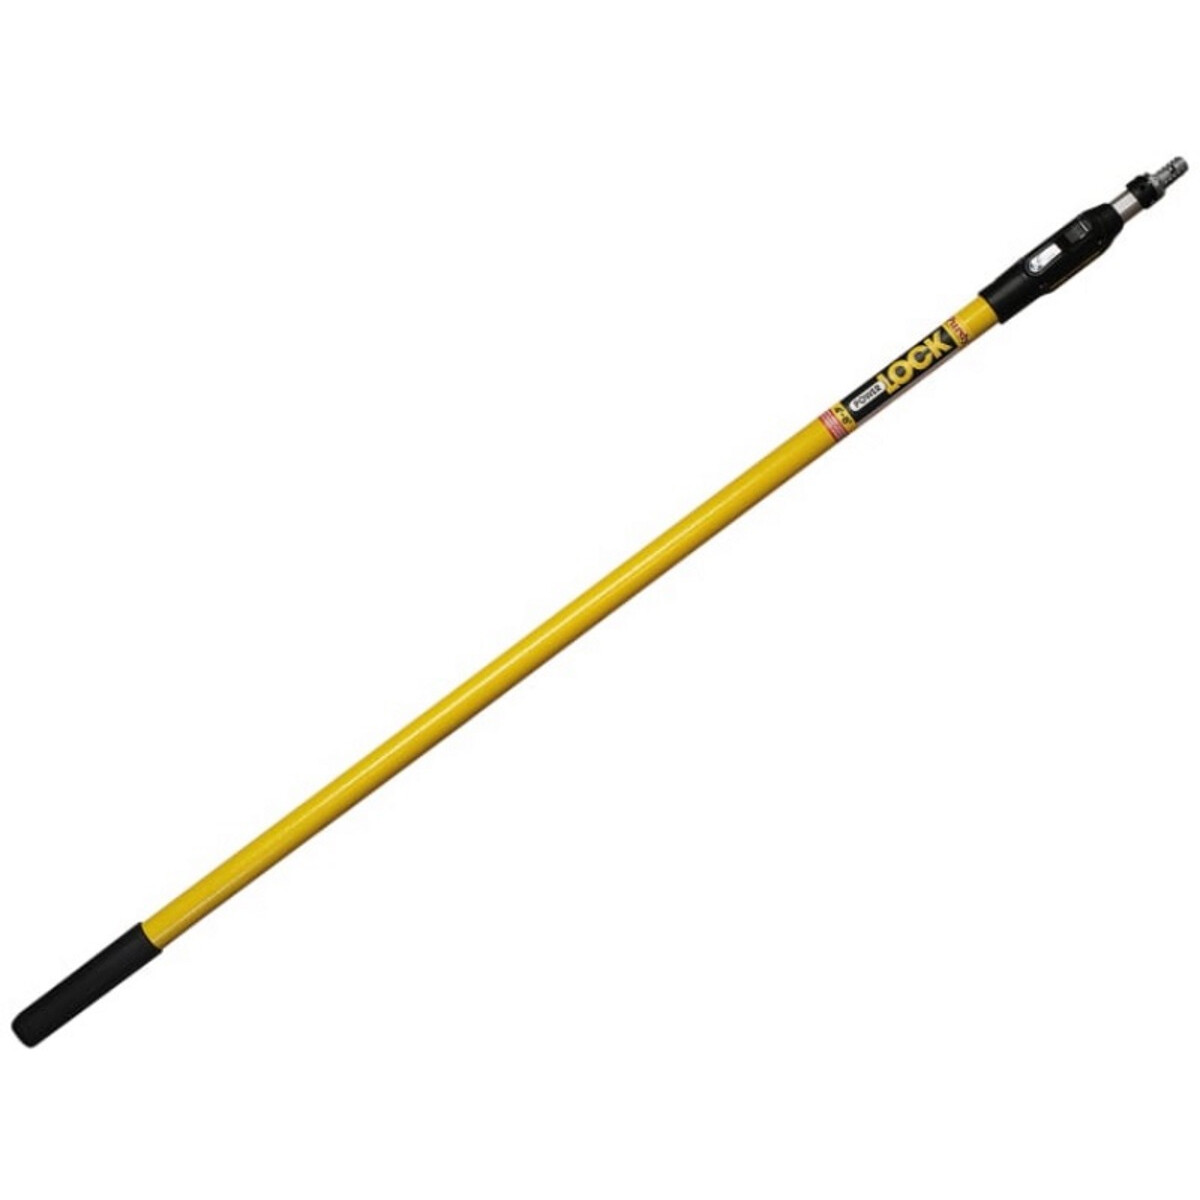 Purdy Power Lock 2-ft to 4-ft Telescoping Threaded Extension Pole 140855624